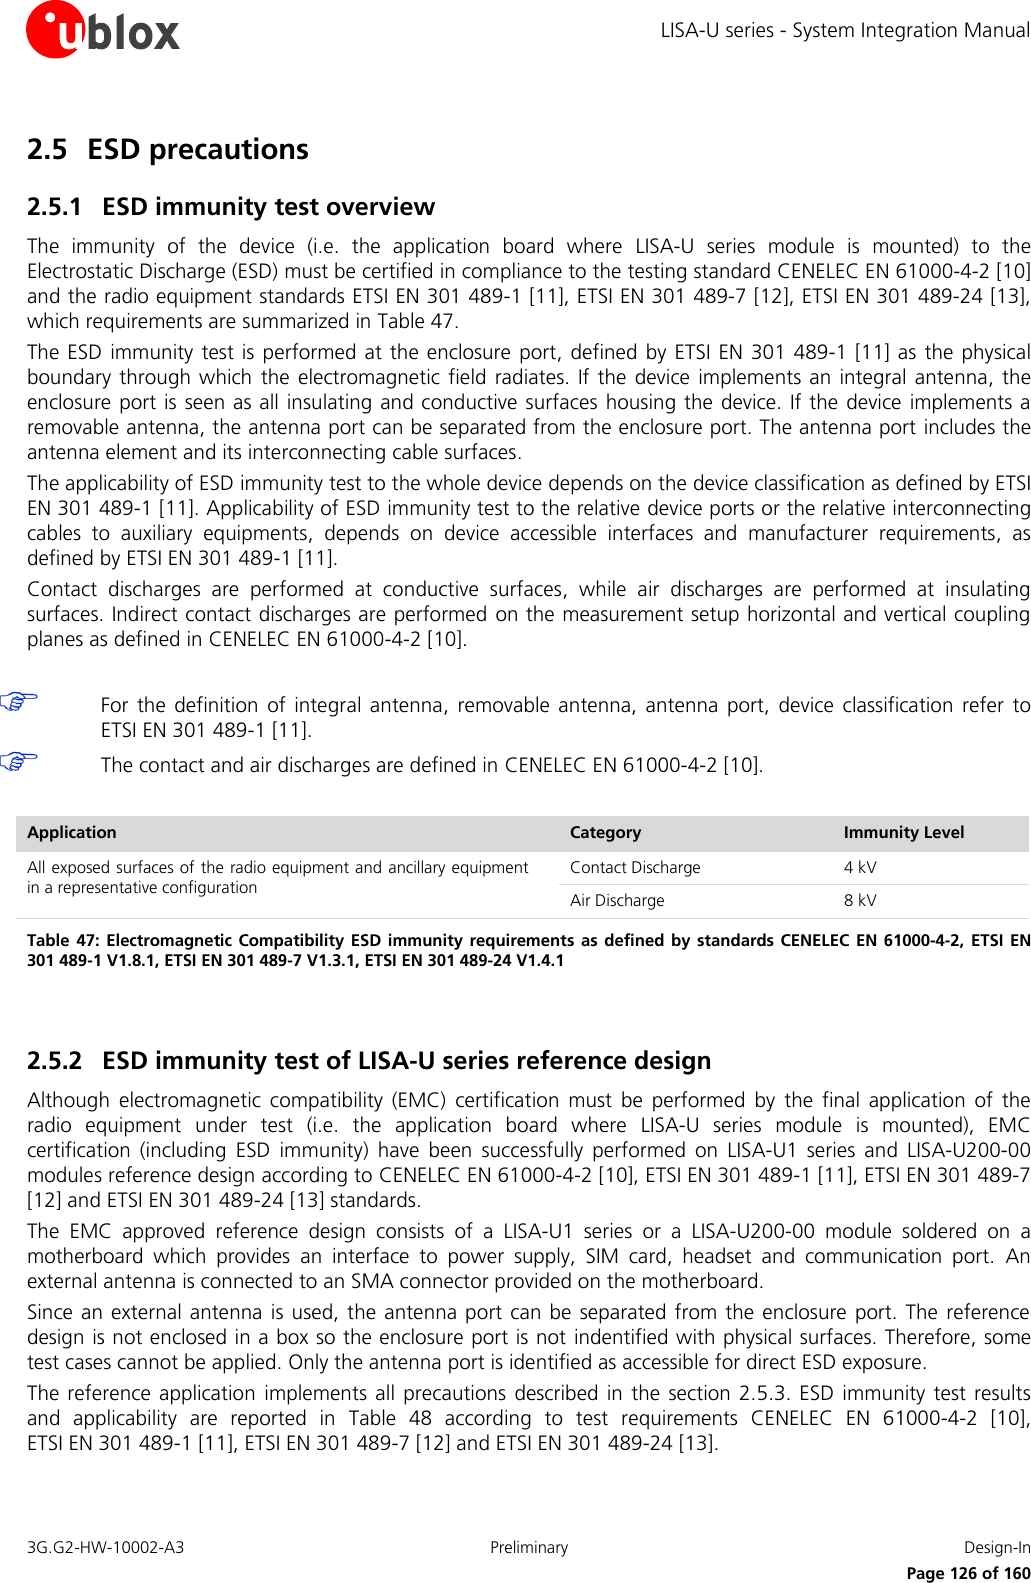 LISA-U series - System Integration Manual 3G.G2-HW-10002-A3  Preliminary  Design-In      Page 126 of 160 2.5 ESD precautions  2.5.1 ESD immunity test overview The  immunity  of  the  device  (i.e.  the  application  board  where  LISA-U  series  module  is  mounted)  to  the Electrostatic Discharge (ESD) must be certified in compliance to the testing standard CENELEC EN 61000-4-2 [10] and the radio equipment standards ETSI EN 301 489-1 [11], ETSI EN 301 489-7 [12], ETSI EN 301 489-24 [13], which requirements are summarized in Table 47. The ESD  immunity test is  performed  at the enclosure  port, defined  by ETSI EN  301 489-1  [11] as the  physical boundary through  which  the electromagnetic field radiates. If  the device  implements an integral antenna, the enclosure port is seen as all insulating and conductive surfaces  housing the device. If the device implements a removable antenna, the antenna port can be separated from the enclosure port. The antenna port includes the antenna element and its interconnecting cable surfaces. The applicability of ESD immunity test to the whole device depends on the device classification as defined by ETSI EN 301 489-1 [11]. Applicability of ESD immunity test to the relative device ports or the relative interconnecting cables  to  auxiliary  equipments,  depends  on  device  accessible  interfaces  and  manufacturer  requirements,  as defined by ETSI EN 301 489-1 [11]. Contact  discharges  are  performed  at  conductive  surfaces,  while  air  discharges  are  performed  at  insulating surfaces. Indirect contact discharges are performed  on the measurement setup horizontal and vertical coupling planes as defined in CENELEC EN 61000-4-2 [10].   For  the definition  of  integral  antenna,  removable  antenna,  antenna  port,  device  classification  refer  to ETSI EN 301 489-1 [11].  The contact and air discharges are defined in CENELEC EN 61000-4-2 [10].  Application Category Immunity Level All exposed surfaces of the radio equipment and ancillary equipment in a representative configuration Contact Discharge 4 kV Air Discharge 8 kV Table 47:  Electromagnetic Compatibility ESD immunity requirements as  defined by  standards CENELEC EN 61000-4-2, ETSI EN 301 489-1 V1.8.1, ETSI EN 301 489-7 V1.3.1, ETSI EN 301 489-24 V1.4.1  2.5.2 ESD immunity test of LISA-U series reference design Although  electromagnetic  compatibility  (EMC)  certification  must  be  performed  by  the  final  application  of  the radio  equipment  under  test  (i.e.  the  application  board  where  LISA-U  series  module  is  mounted),  EMC certification  (including  ESD  immunity)  have  been  successfully  performed  on  LISA-U1  series  and  LISA-U200-00 modules reference design according to CENELEC EN 61000-4-2 [10], ETSI EN 301 489-1 [11], ETSI EN 301 489-7 [12] and ETSI EN 301 489-24 [13] standards. The  EMC  approved  reference  design  consists  of  a  LISA-U1  series  or  a  LISA-U200-00  module  soldered  on  a motherboard  which  provides  an  interface  to  power  supply,  SIM  card,  headset  and  communication  port.  An external antenna is connected to an SMA connector provided on the motherboard. Since an external antenna  is used, the antenna port can be separated from the enclosure port. The reference design is not enclosed in a box so the enclosure port is not indentified with physical surfaces. Therefore, some test cases cannot be applied. Only the antenna port is identified as accessible for direct ESD exposure. The reference application  implements all precautions described  in the  section 2.5.3. ESD immunity test  results and  applicability  are  reported  in  Table  48  according  to  test  requirements  CENELEC  EN  61000-4-2  [10],  ETSI EN 301 489-1 [11], ETSI EN 301 489-7 [12] and ETSI EN 301 489-24 [13].  